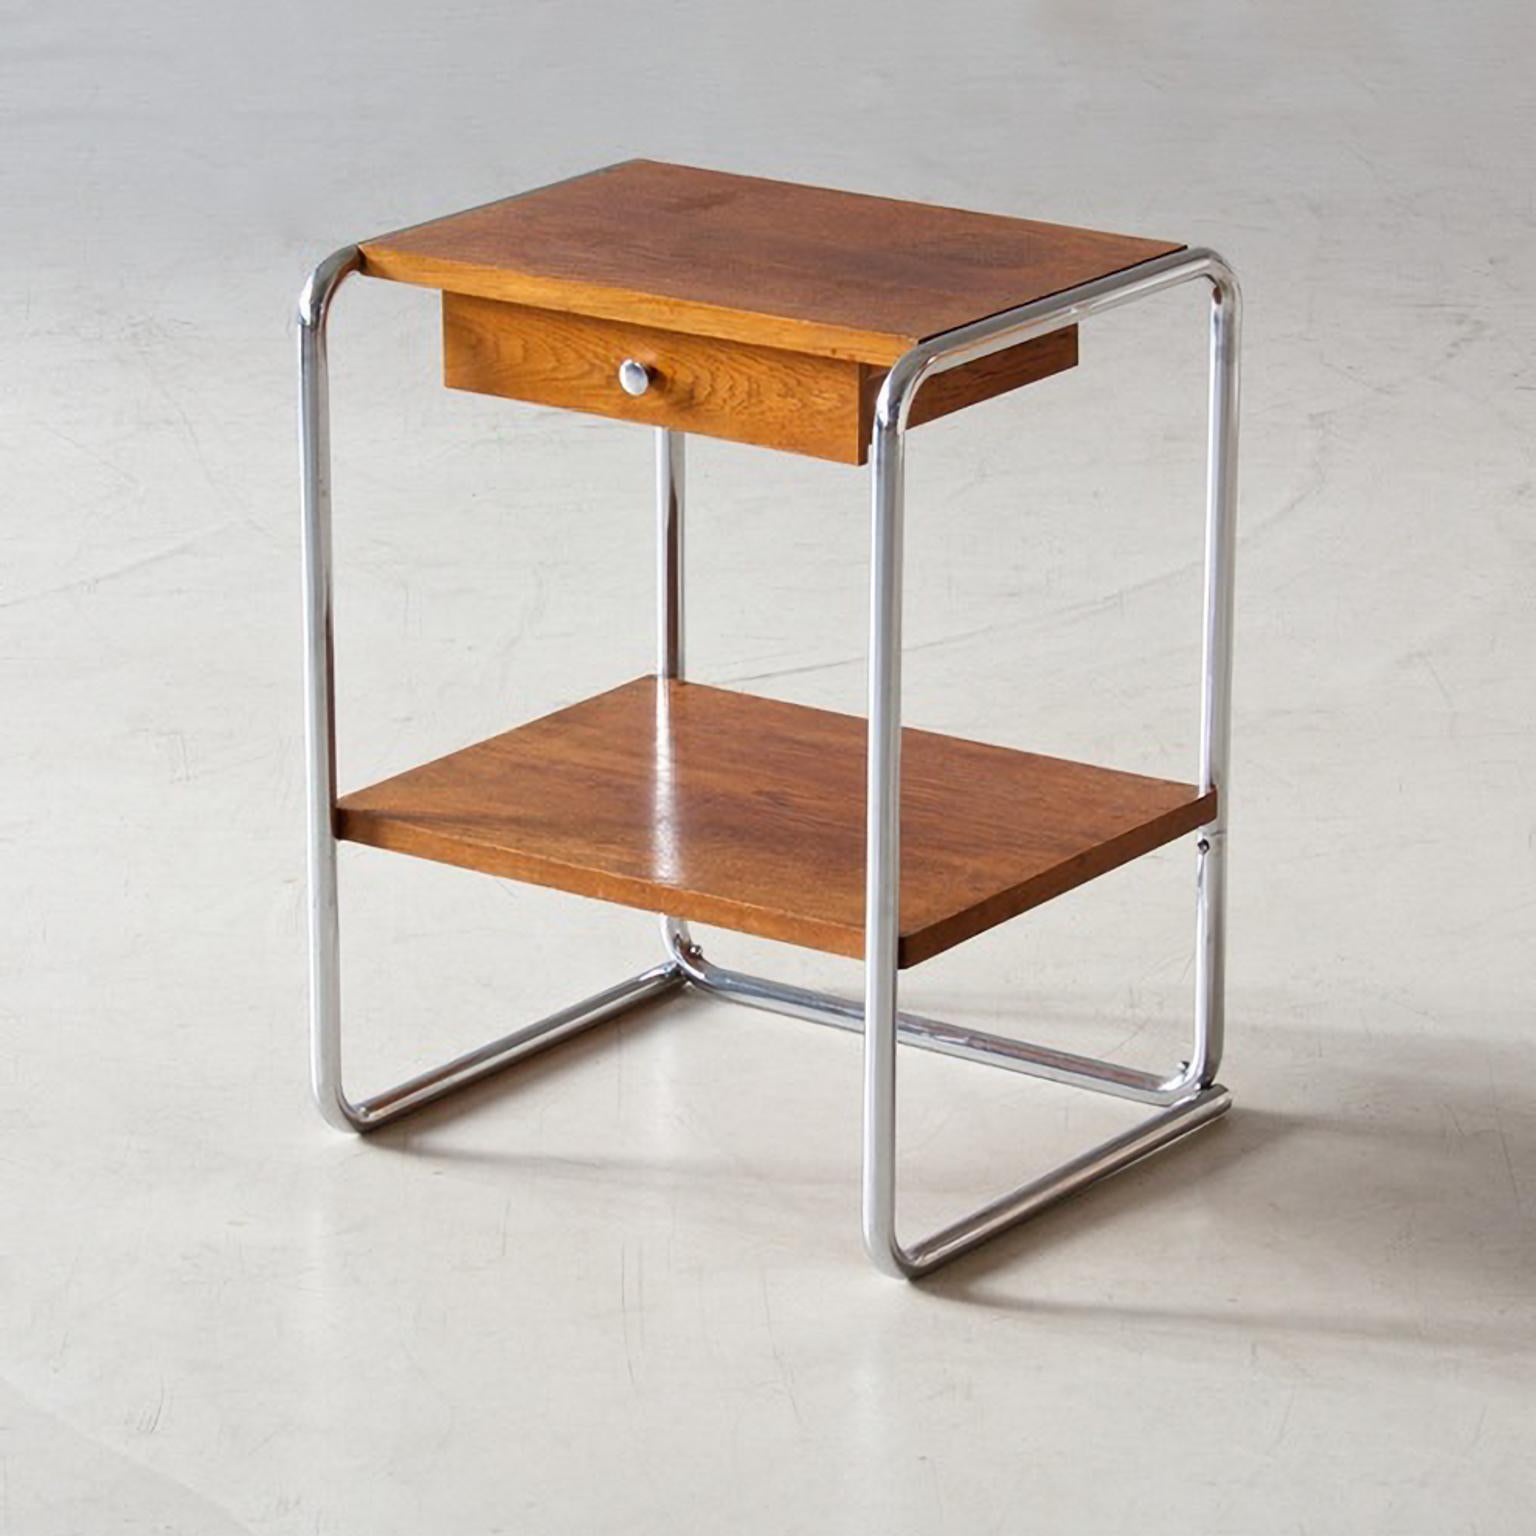 Bauhaus chrome plated tubular steel end table with one drawer. This table model T9 was designed and manufactured by Thonet, circa 1930

This item is restored on request and available in different amounts.
Delivery time 8-10 weeks.